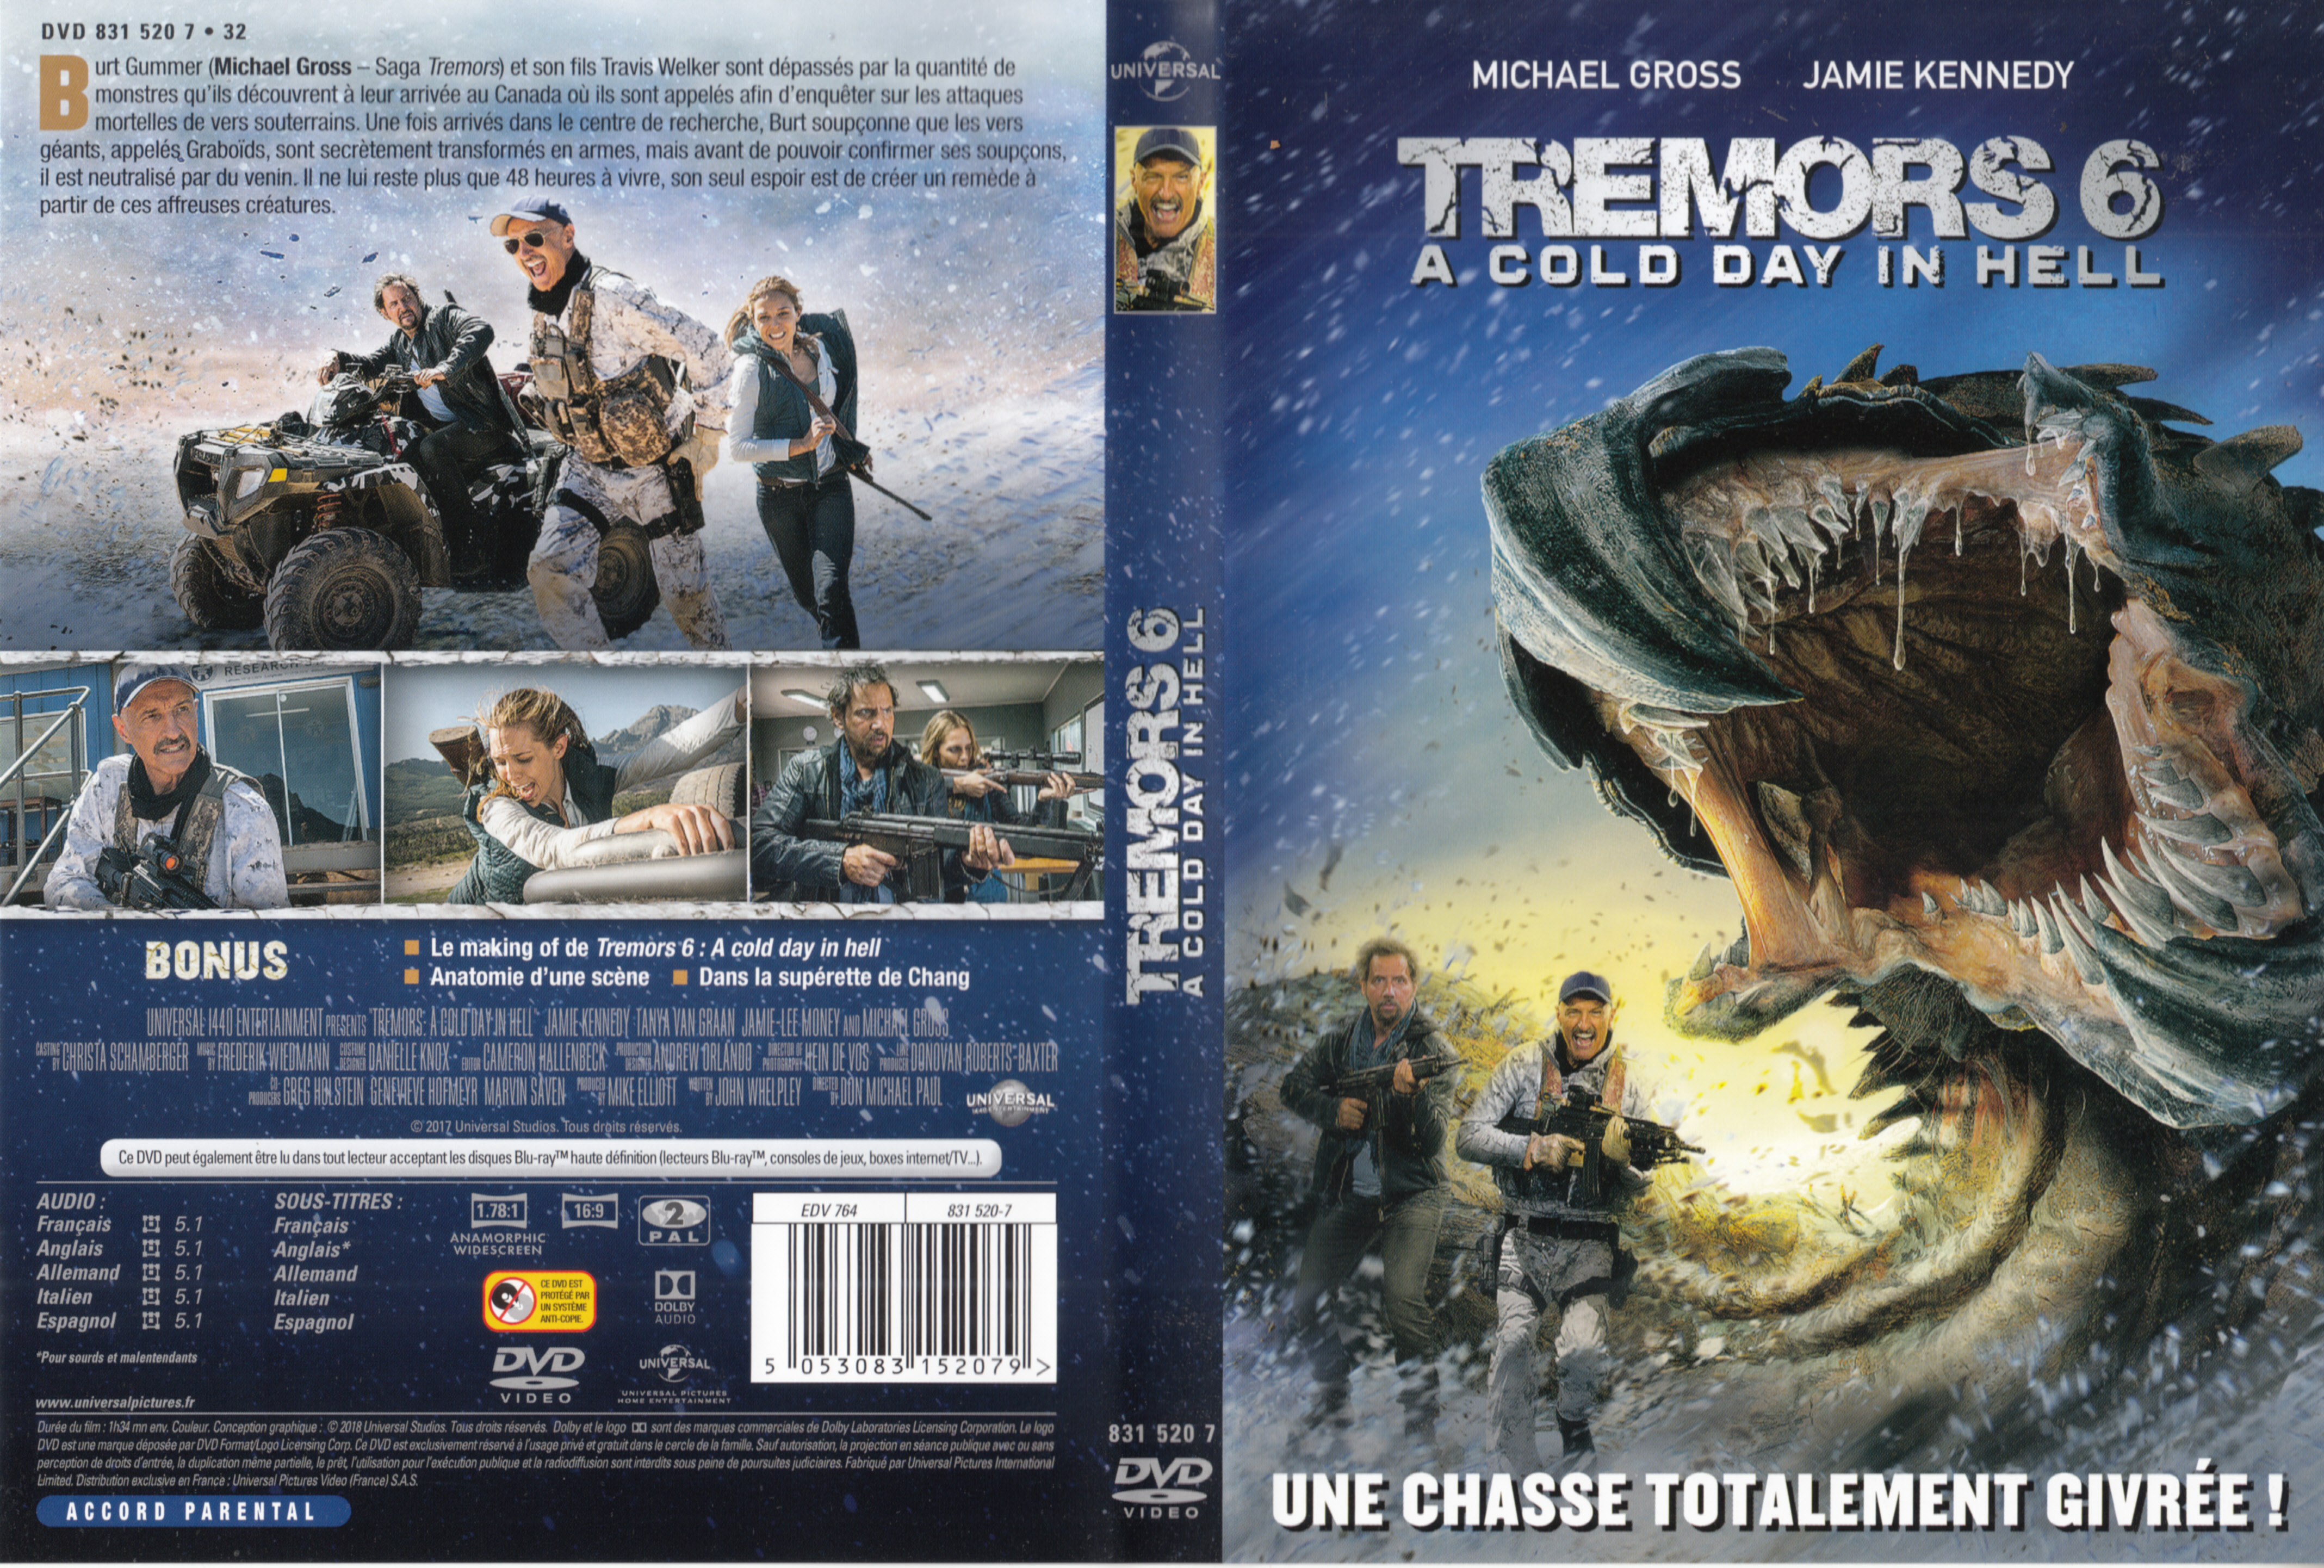 Jaquette DVD Tremors 6 A Cold Day In Hell